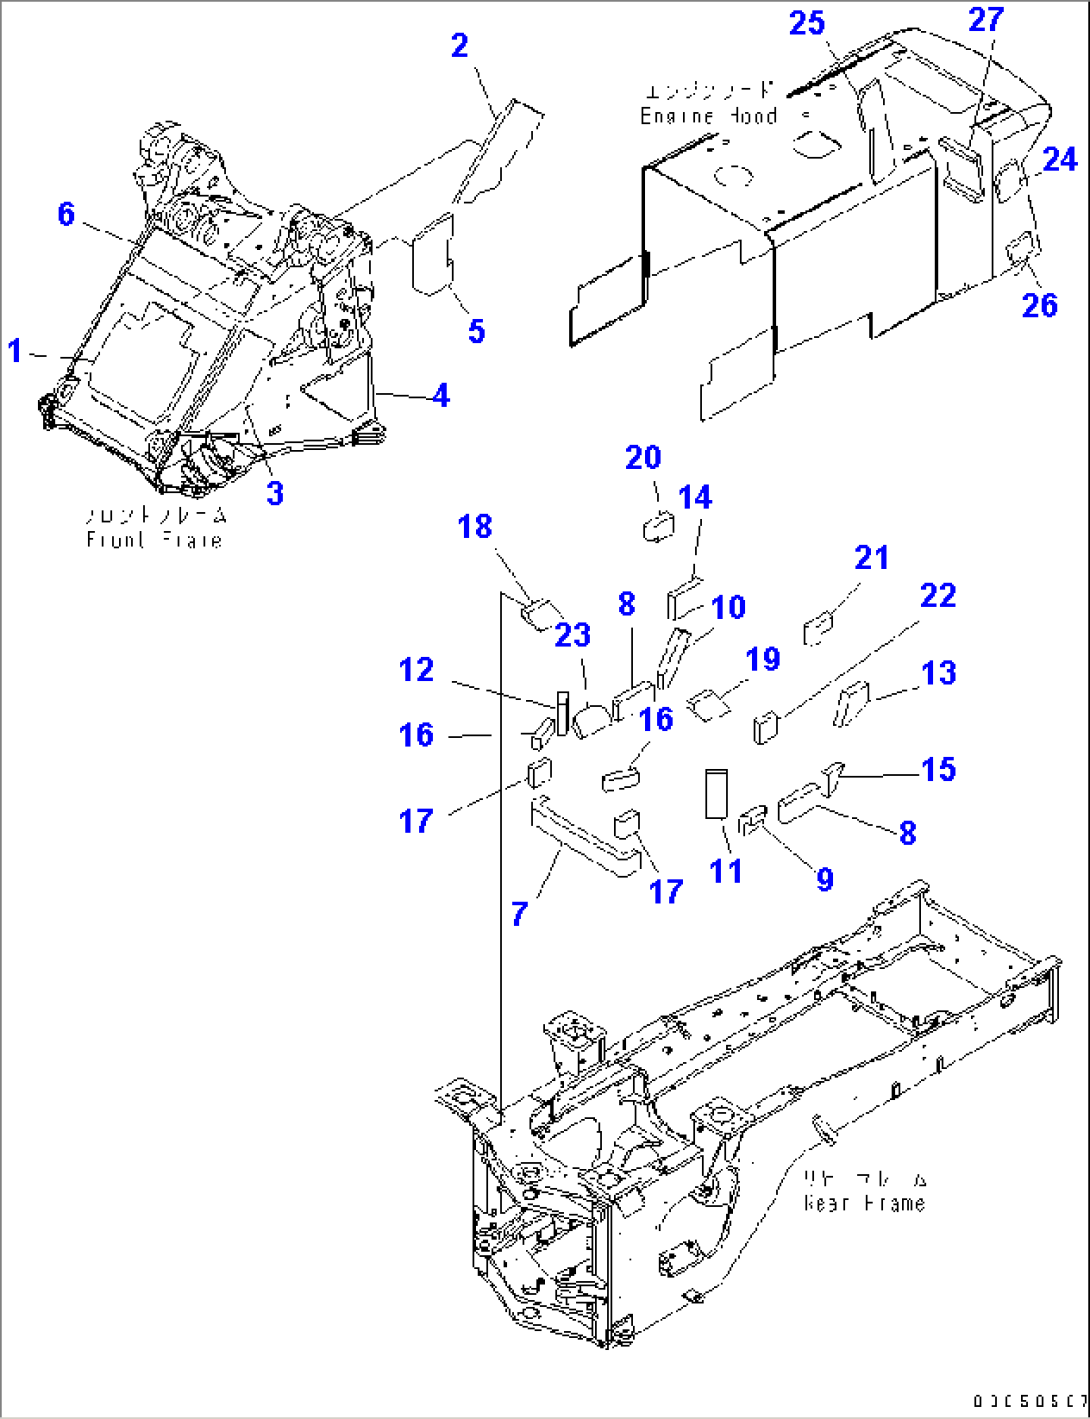 BAR LOCK AND COVER (SHEET) (NOISE REDUCATION ARRANGEMENT)